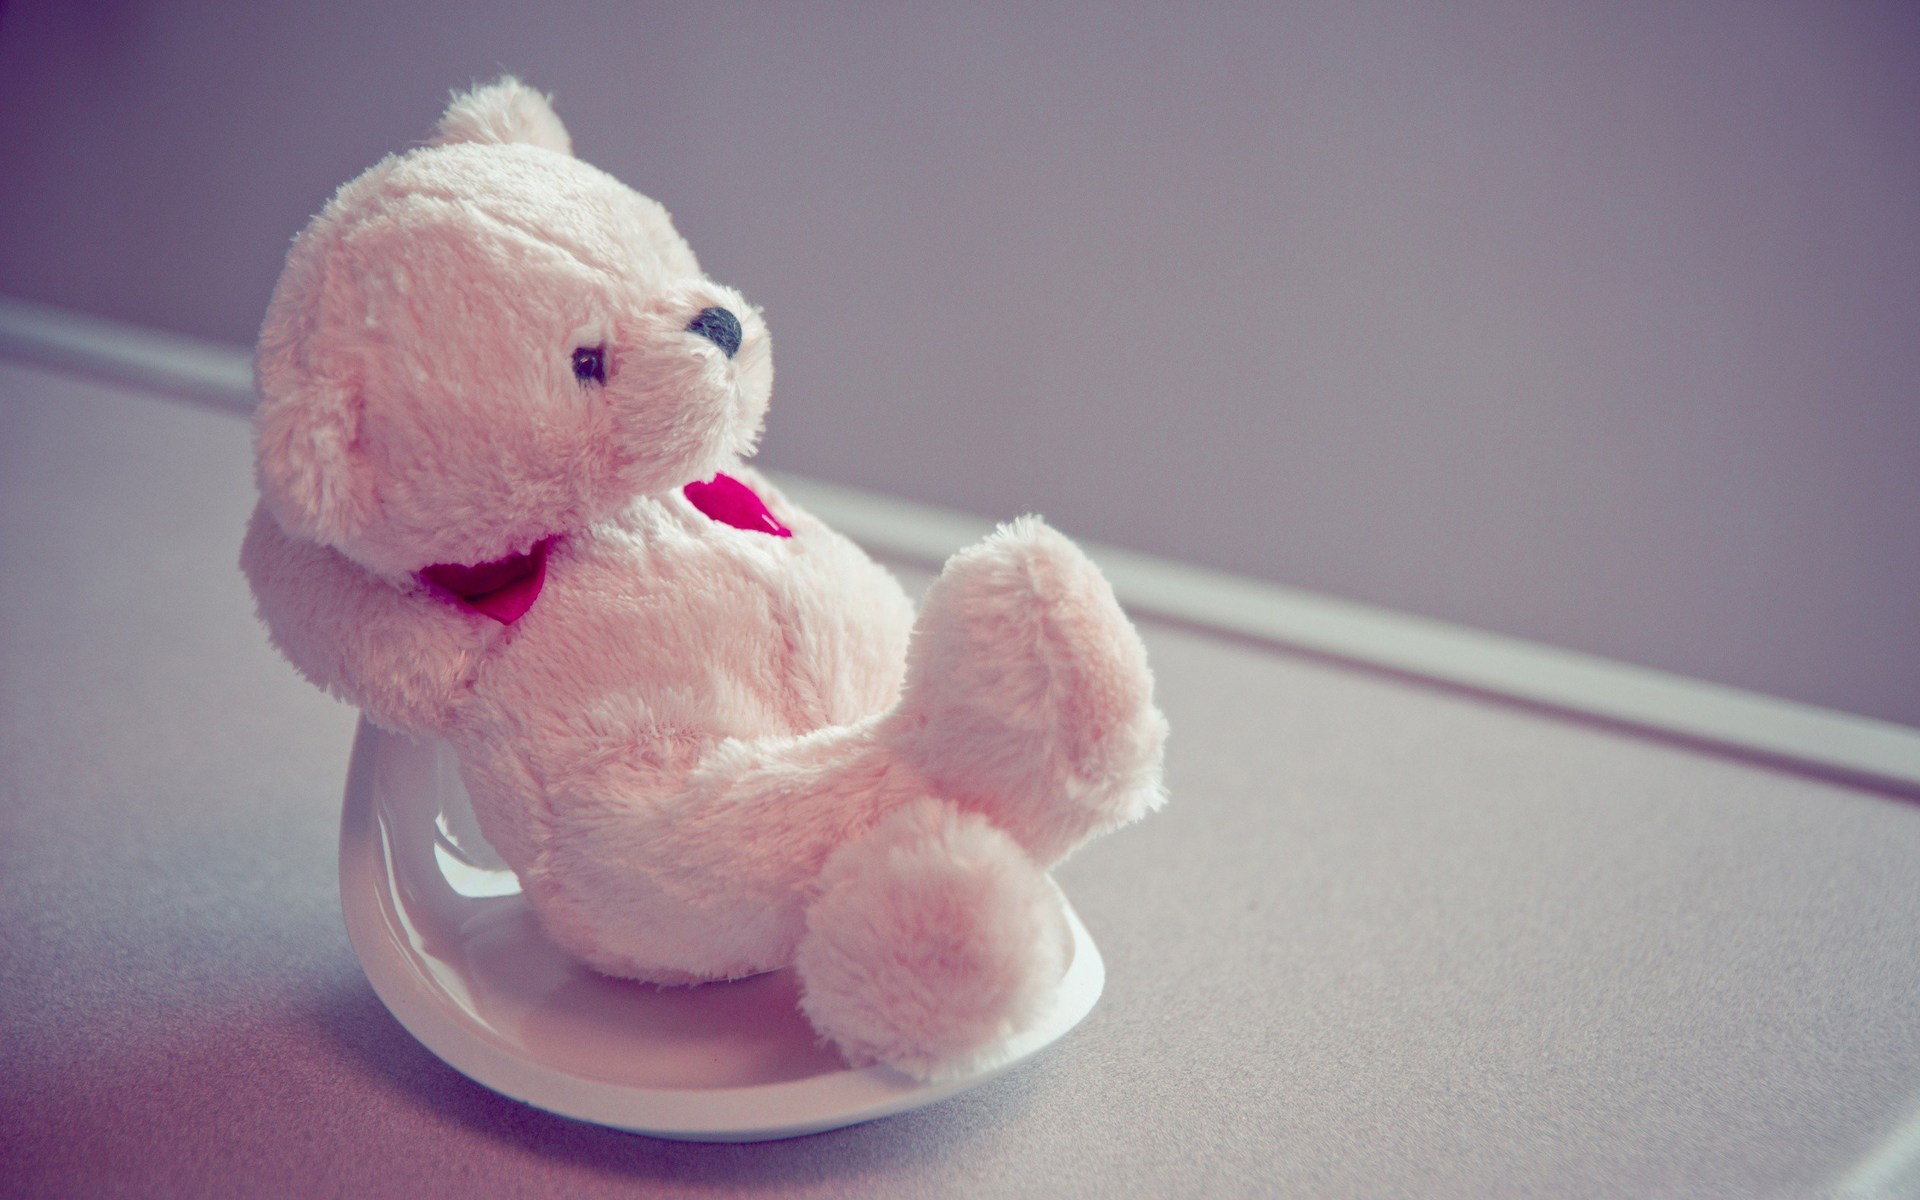 Wallpapers Cute Teddy Bears Is A Great Wallpaper For Your 1920x1200